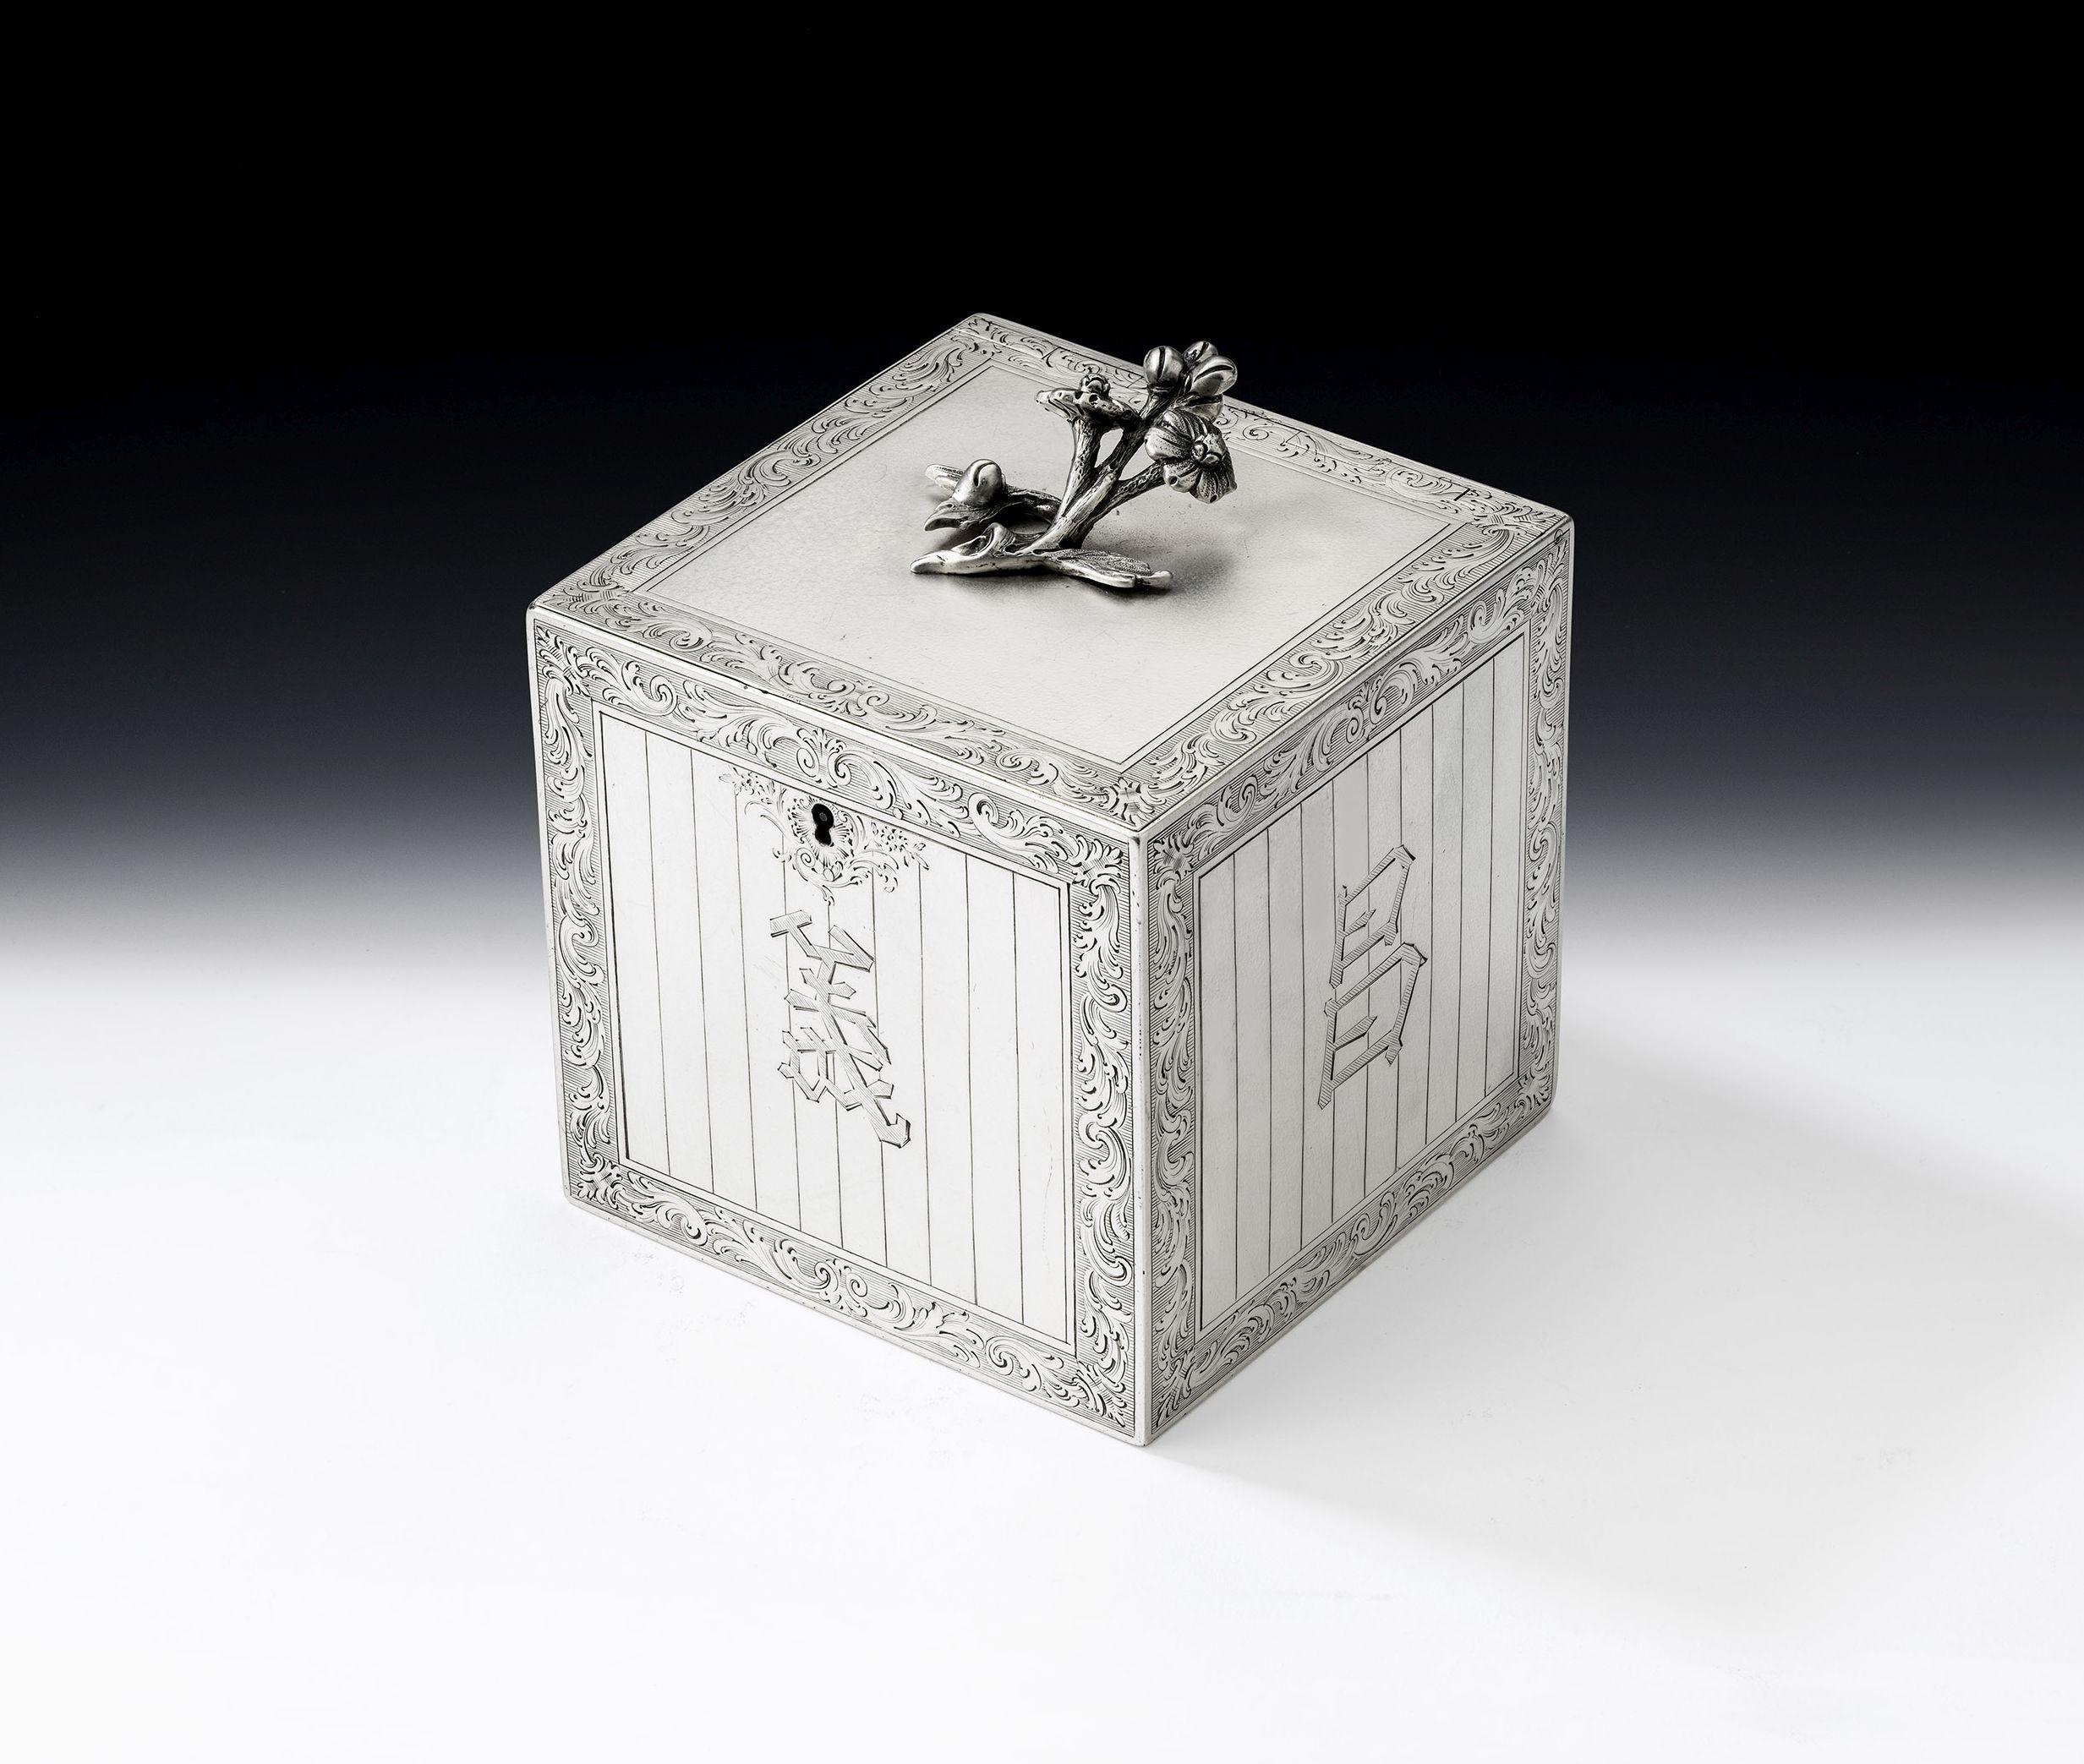 An important & extremely rare George III tea caddy modelled as a tea chest. Made in London in 1767 by Augustin Le Sage.

The Tea Caddy, which is cube shaped in form, is modelled to simulate the chests in which tea was imported from China and is